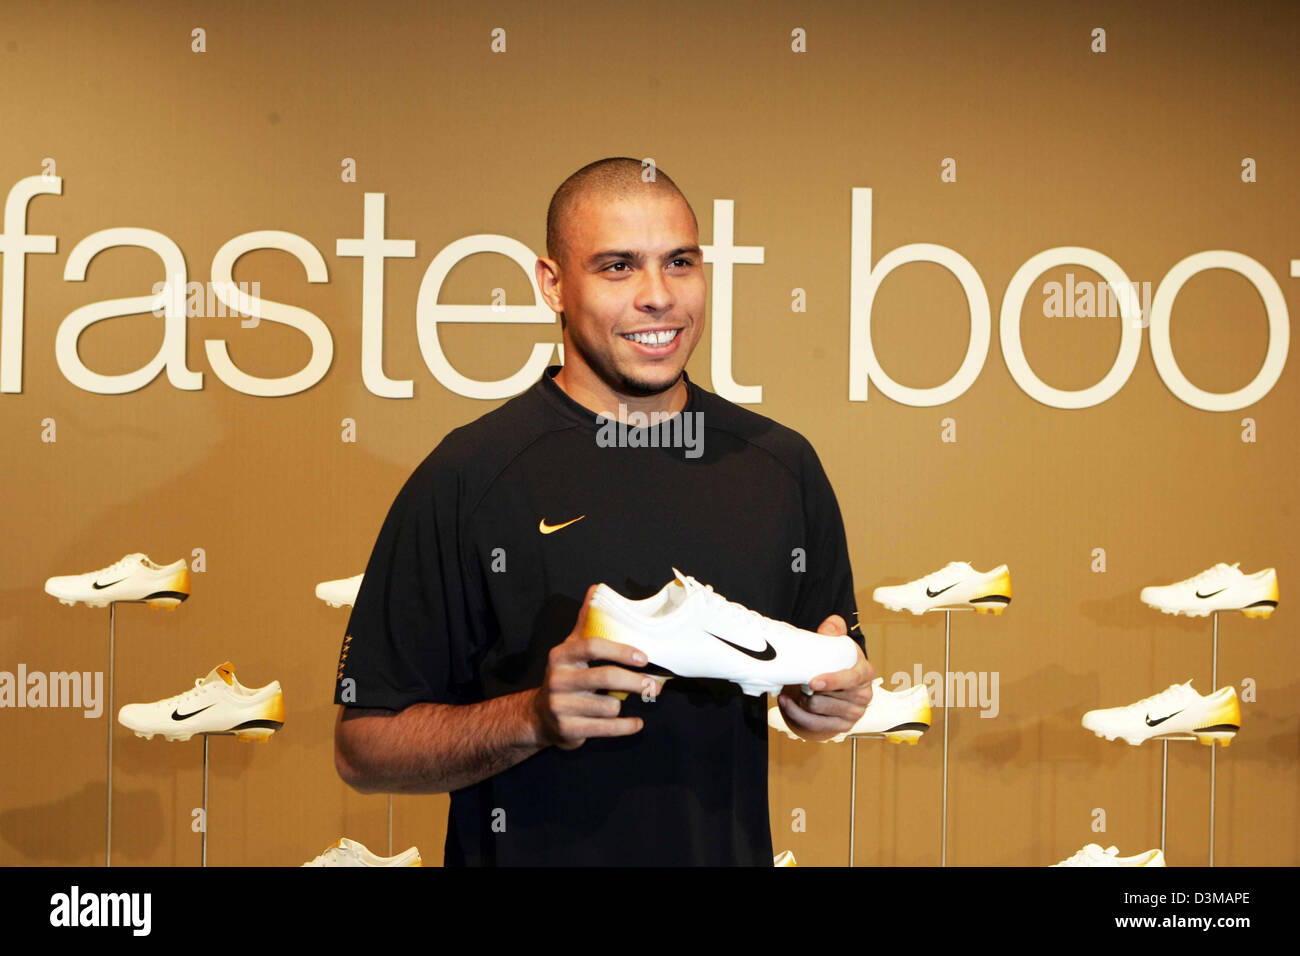 Brazilian soccer superstar Ronaldo presents his new shoe for the FIFA World  Cup 2006 in the Allianz Arena stadium in Munich, Germany, Tuesday 10  January 2006. The new shoe Ronaldo will be